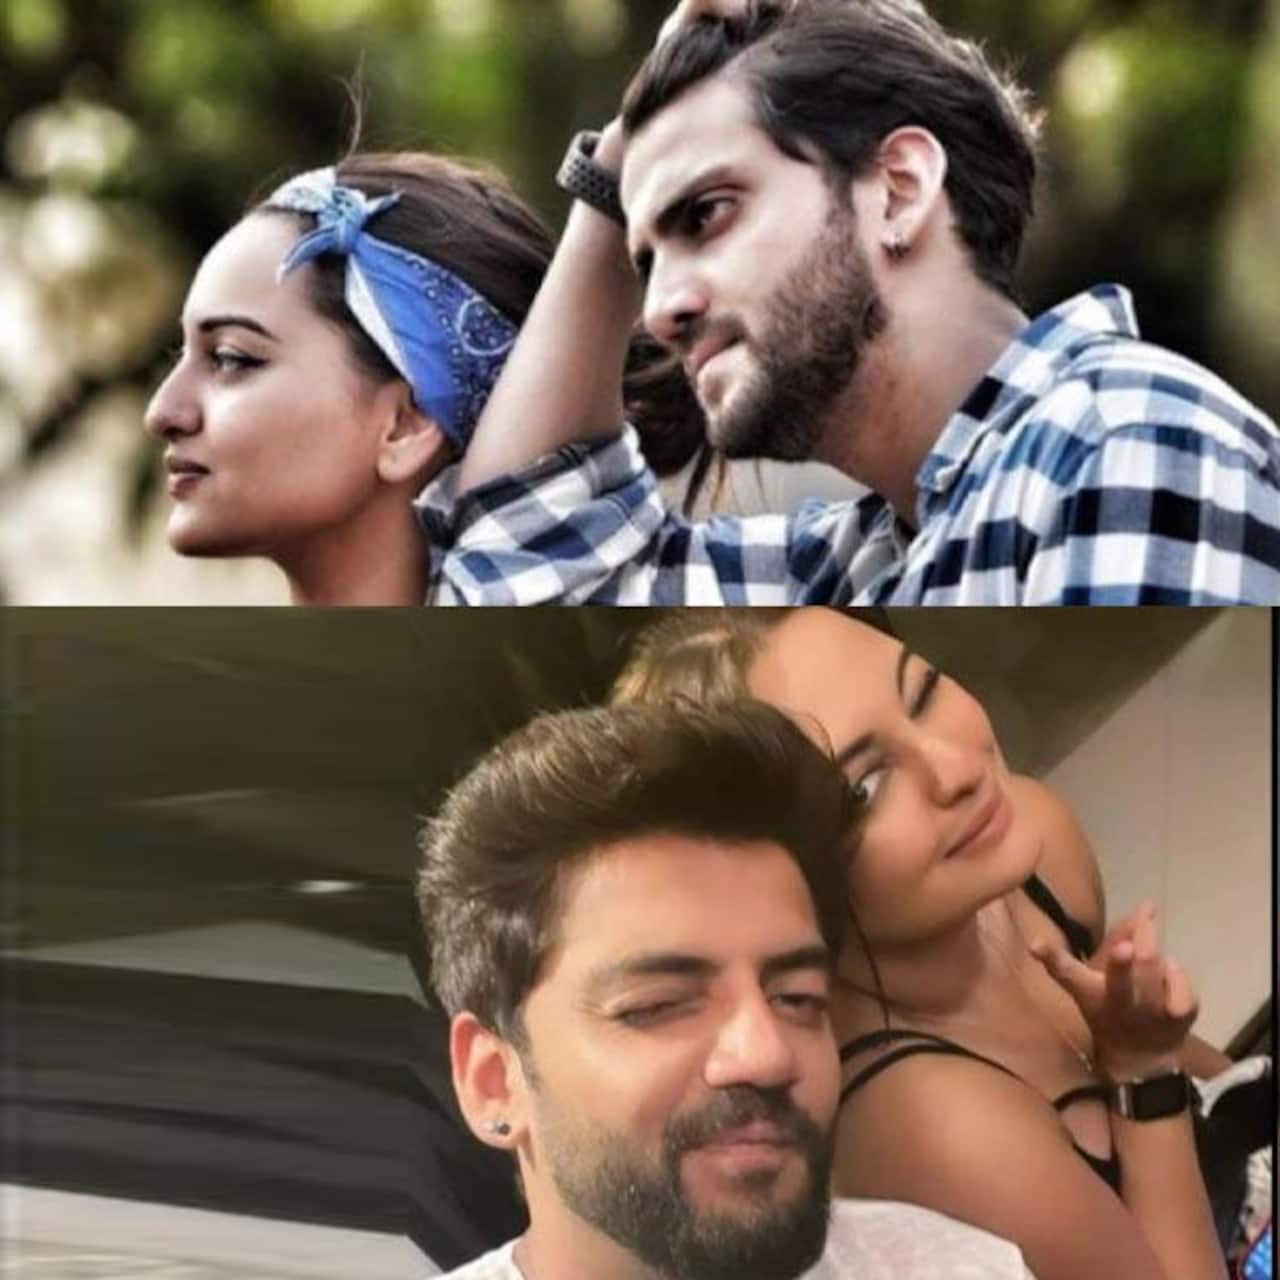 Sonakshi Sinha Zaheer Iqbals Love Timeline How They Met Who Proposed Wedding Plans And More